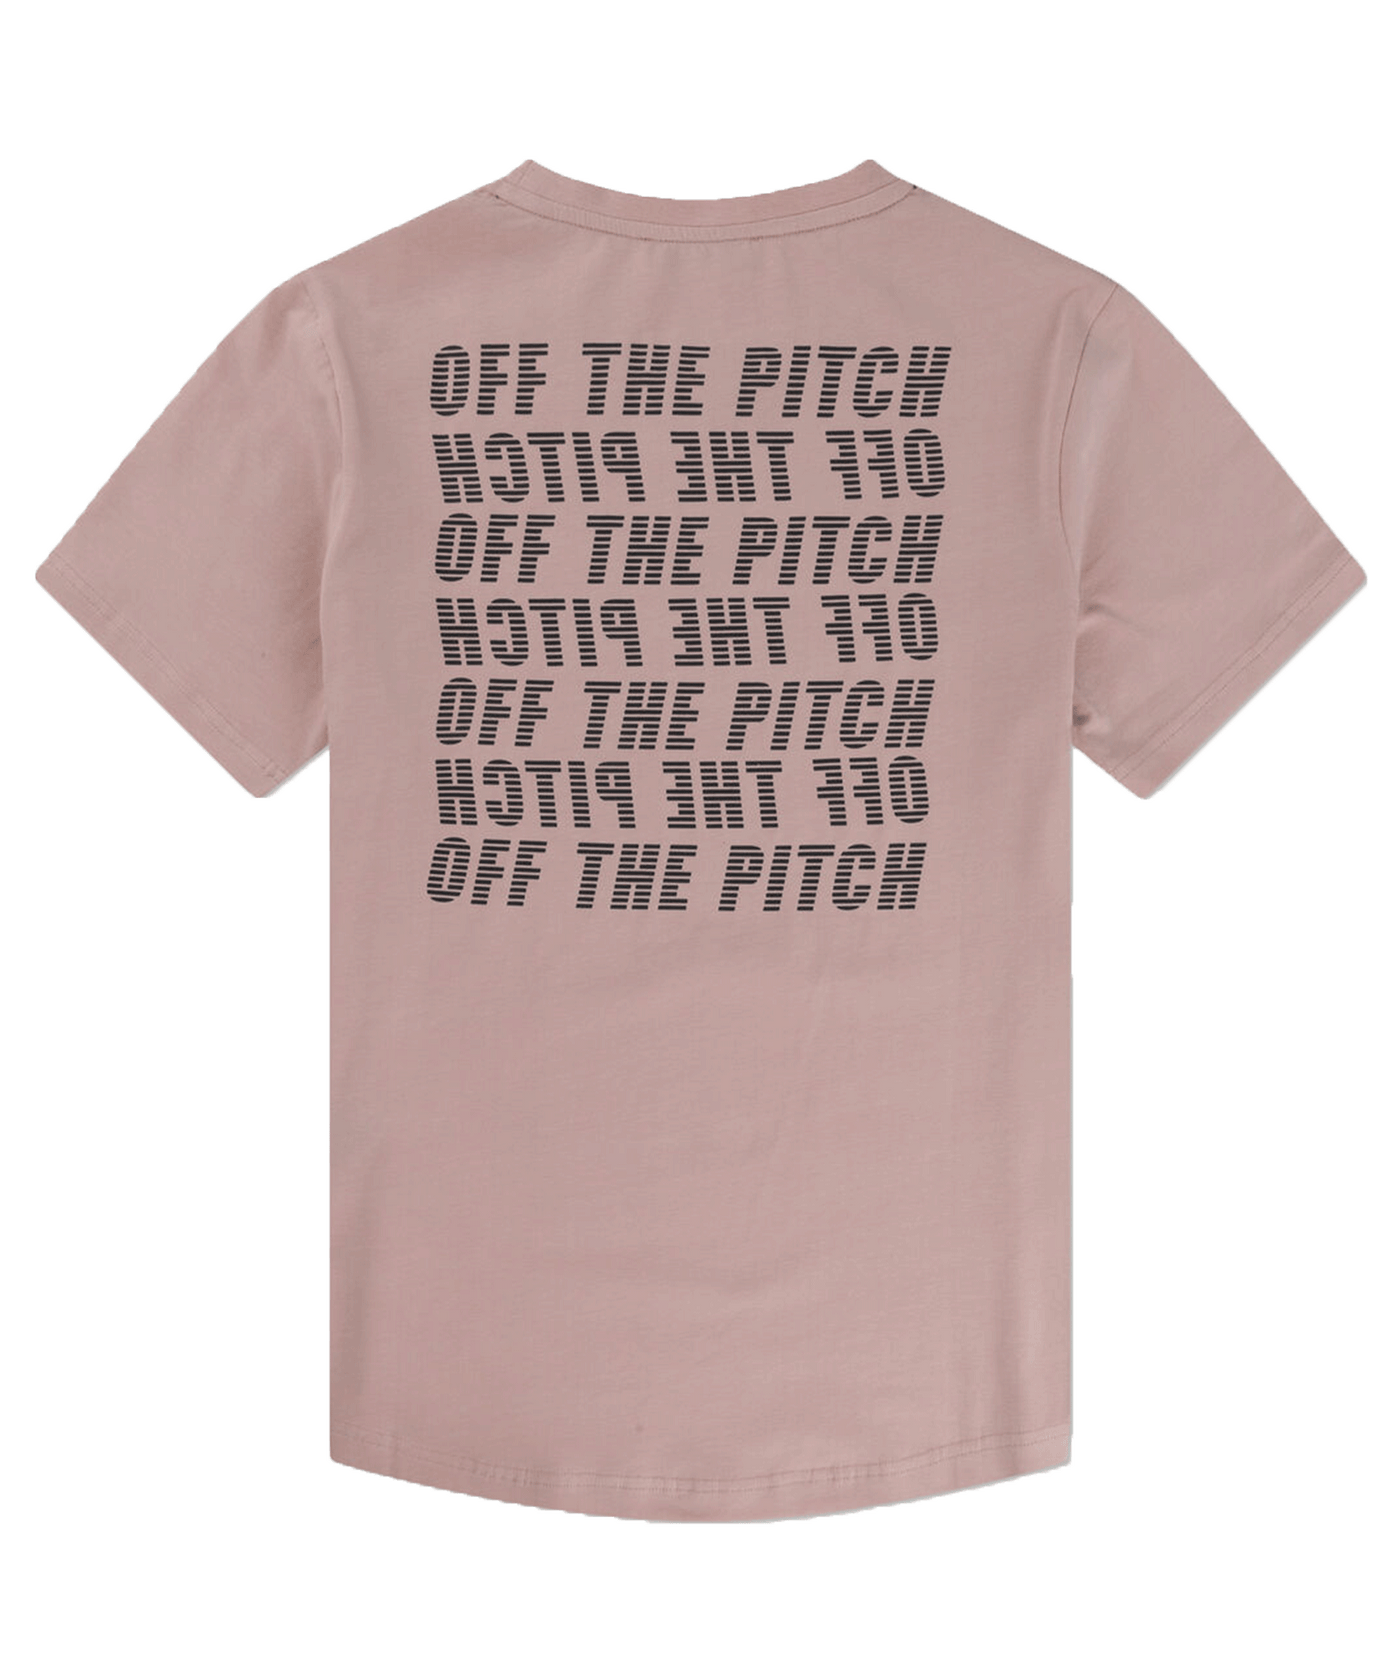 Off The Pitch - Otp241056 - Duplicate T-shirt - 391 Silver Pink